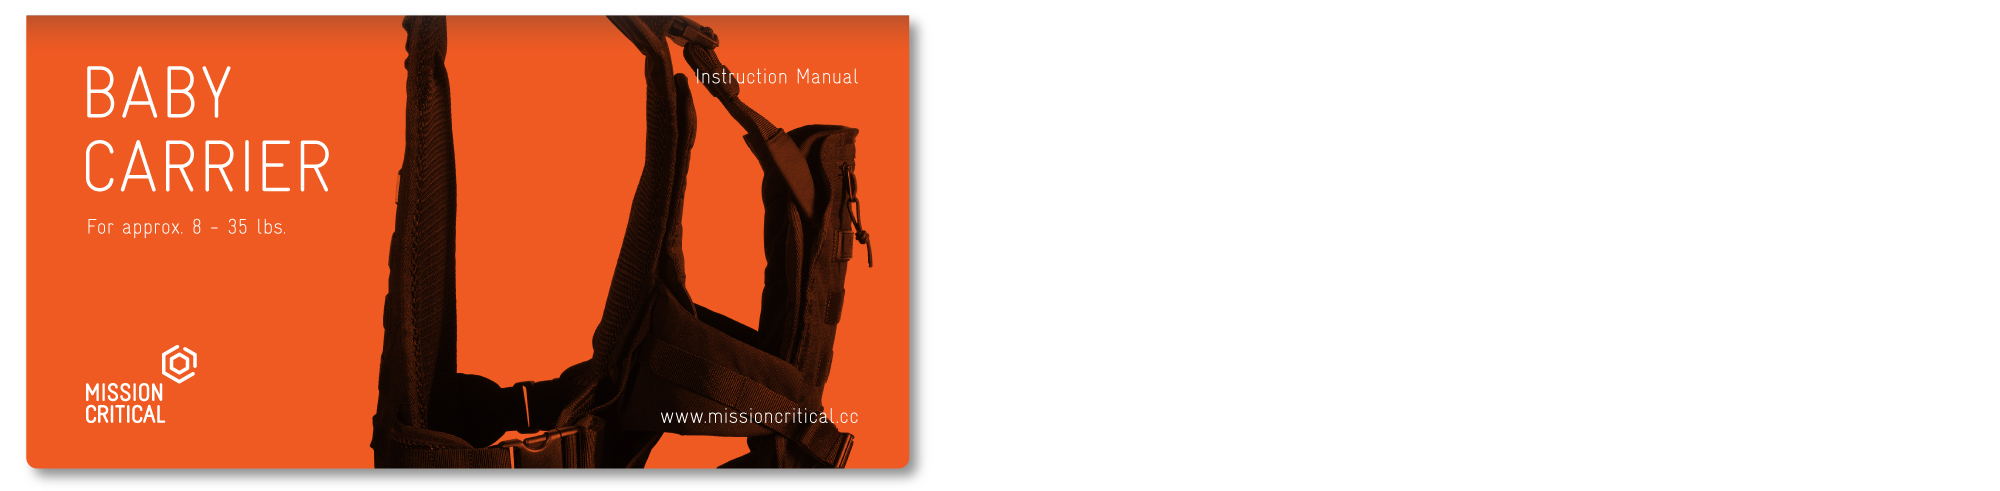 mission critical baby carrier manual